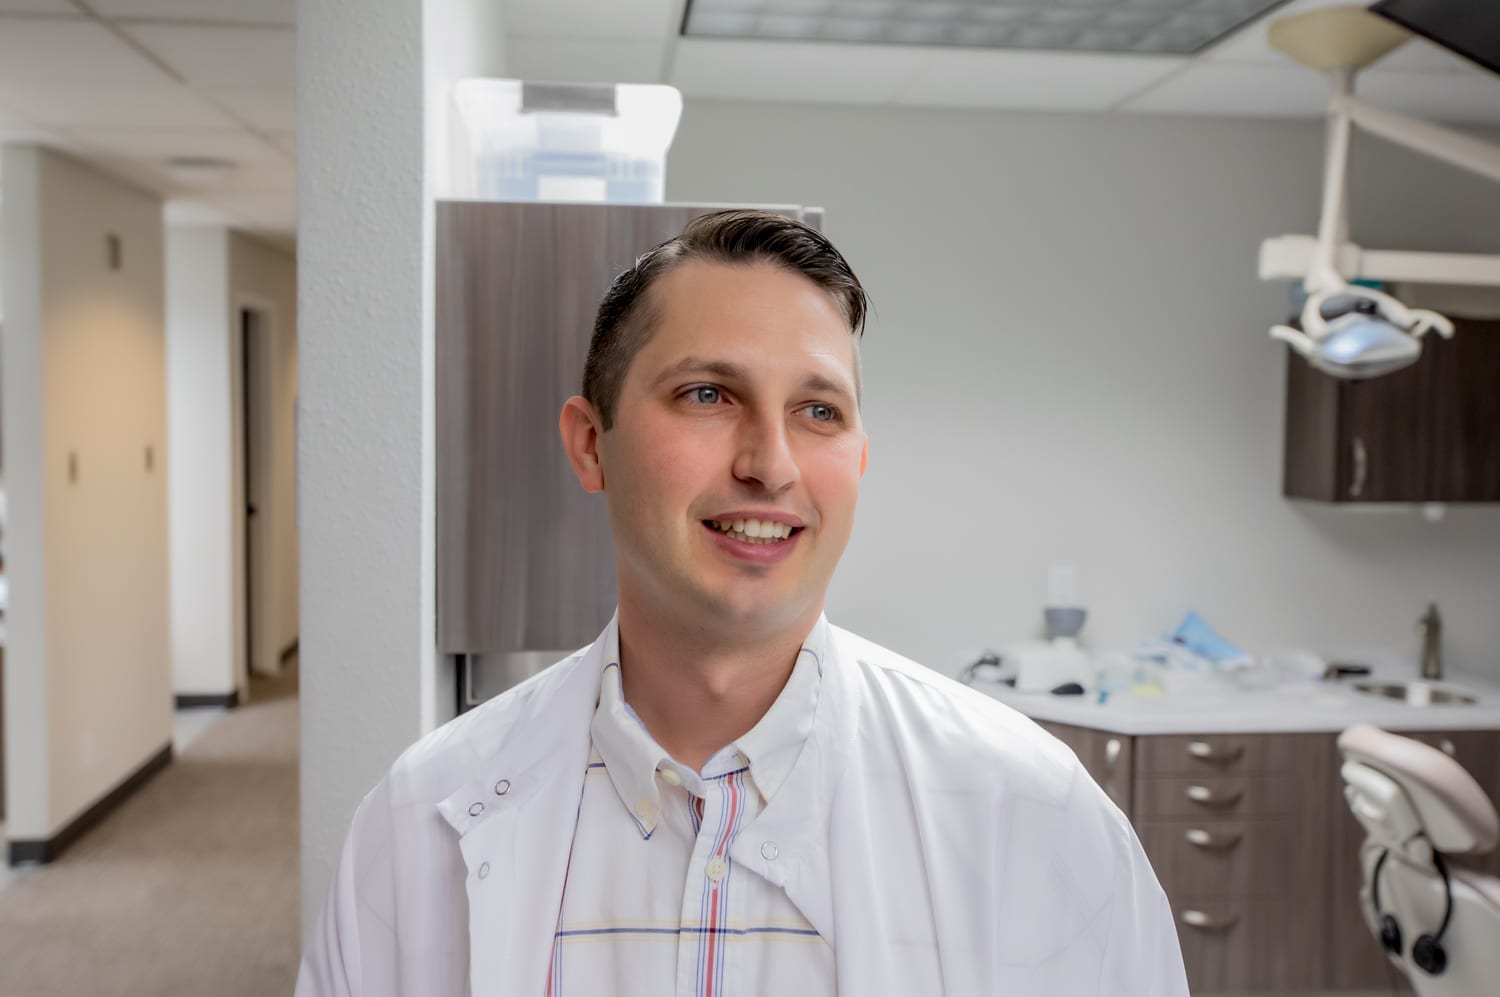 Dr. Wes Karlson from West Richland Family Dental